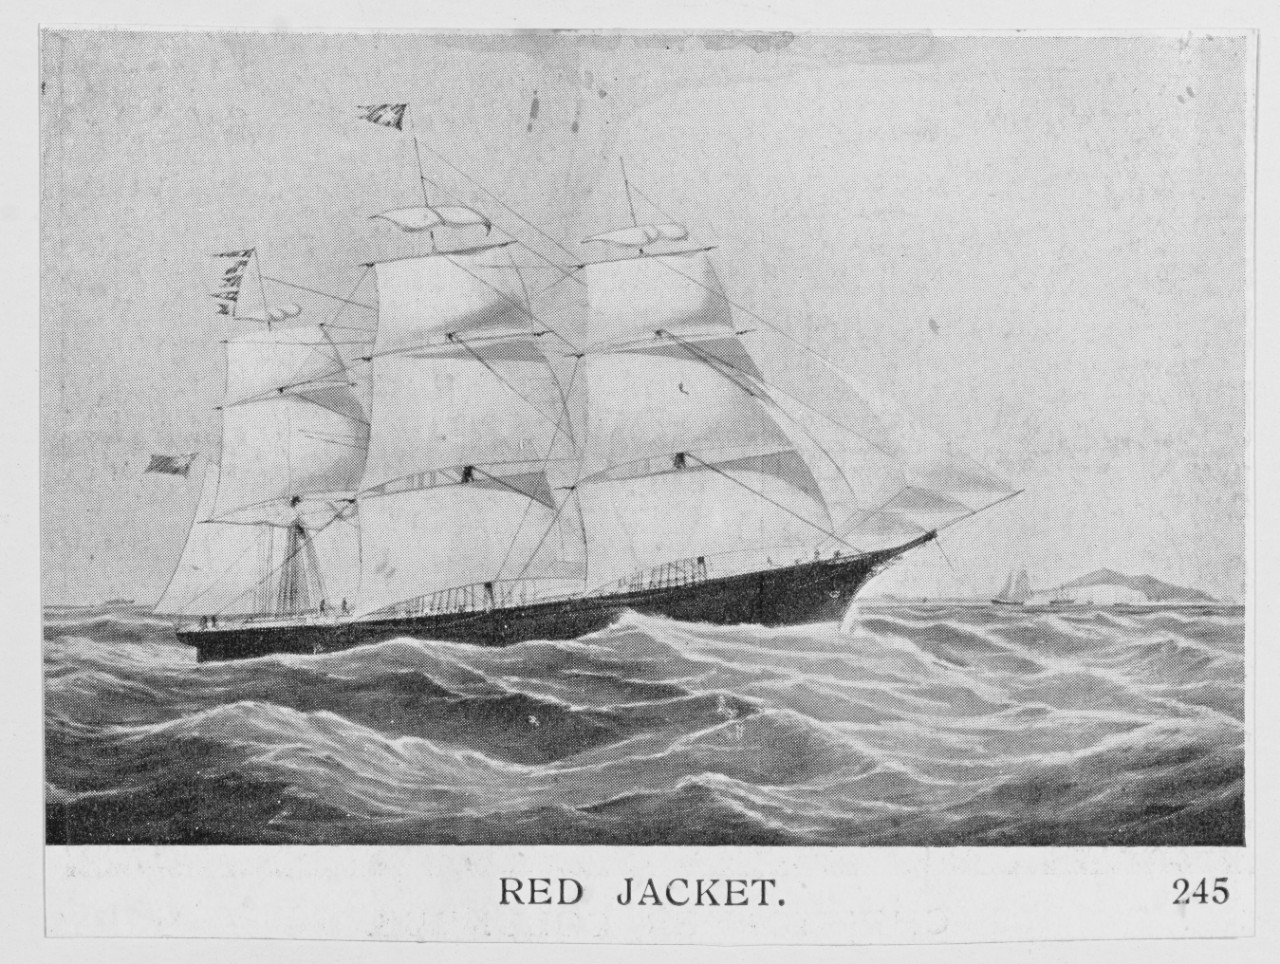 American Clipper Ship RED JACKET